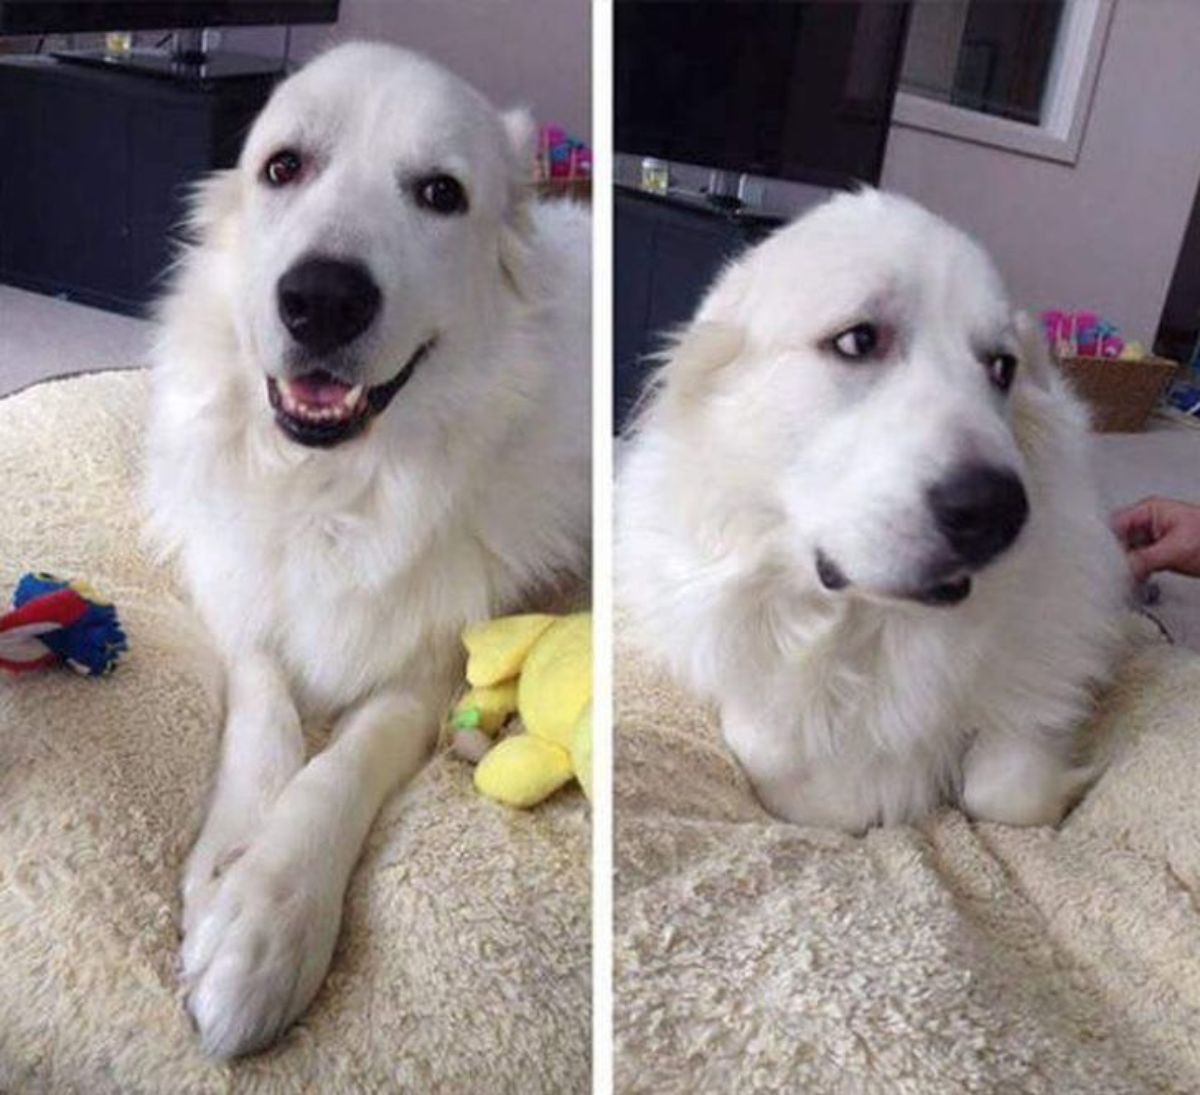 2 photos of a fluffy white dog on a blanket